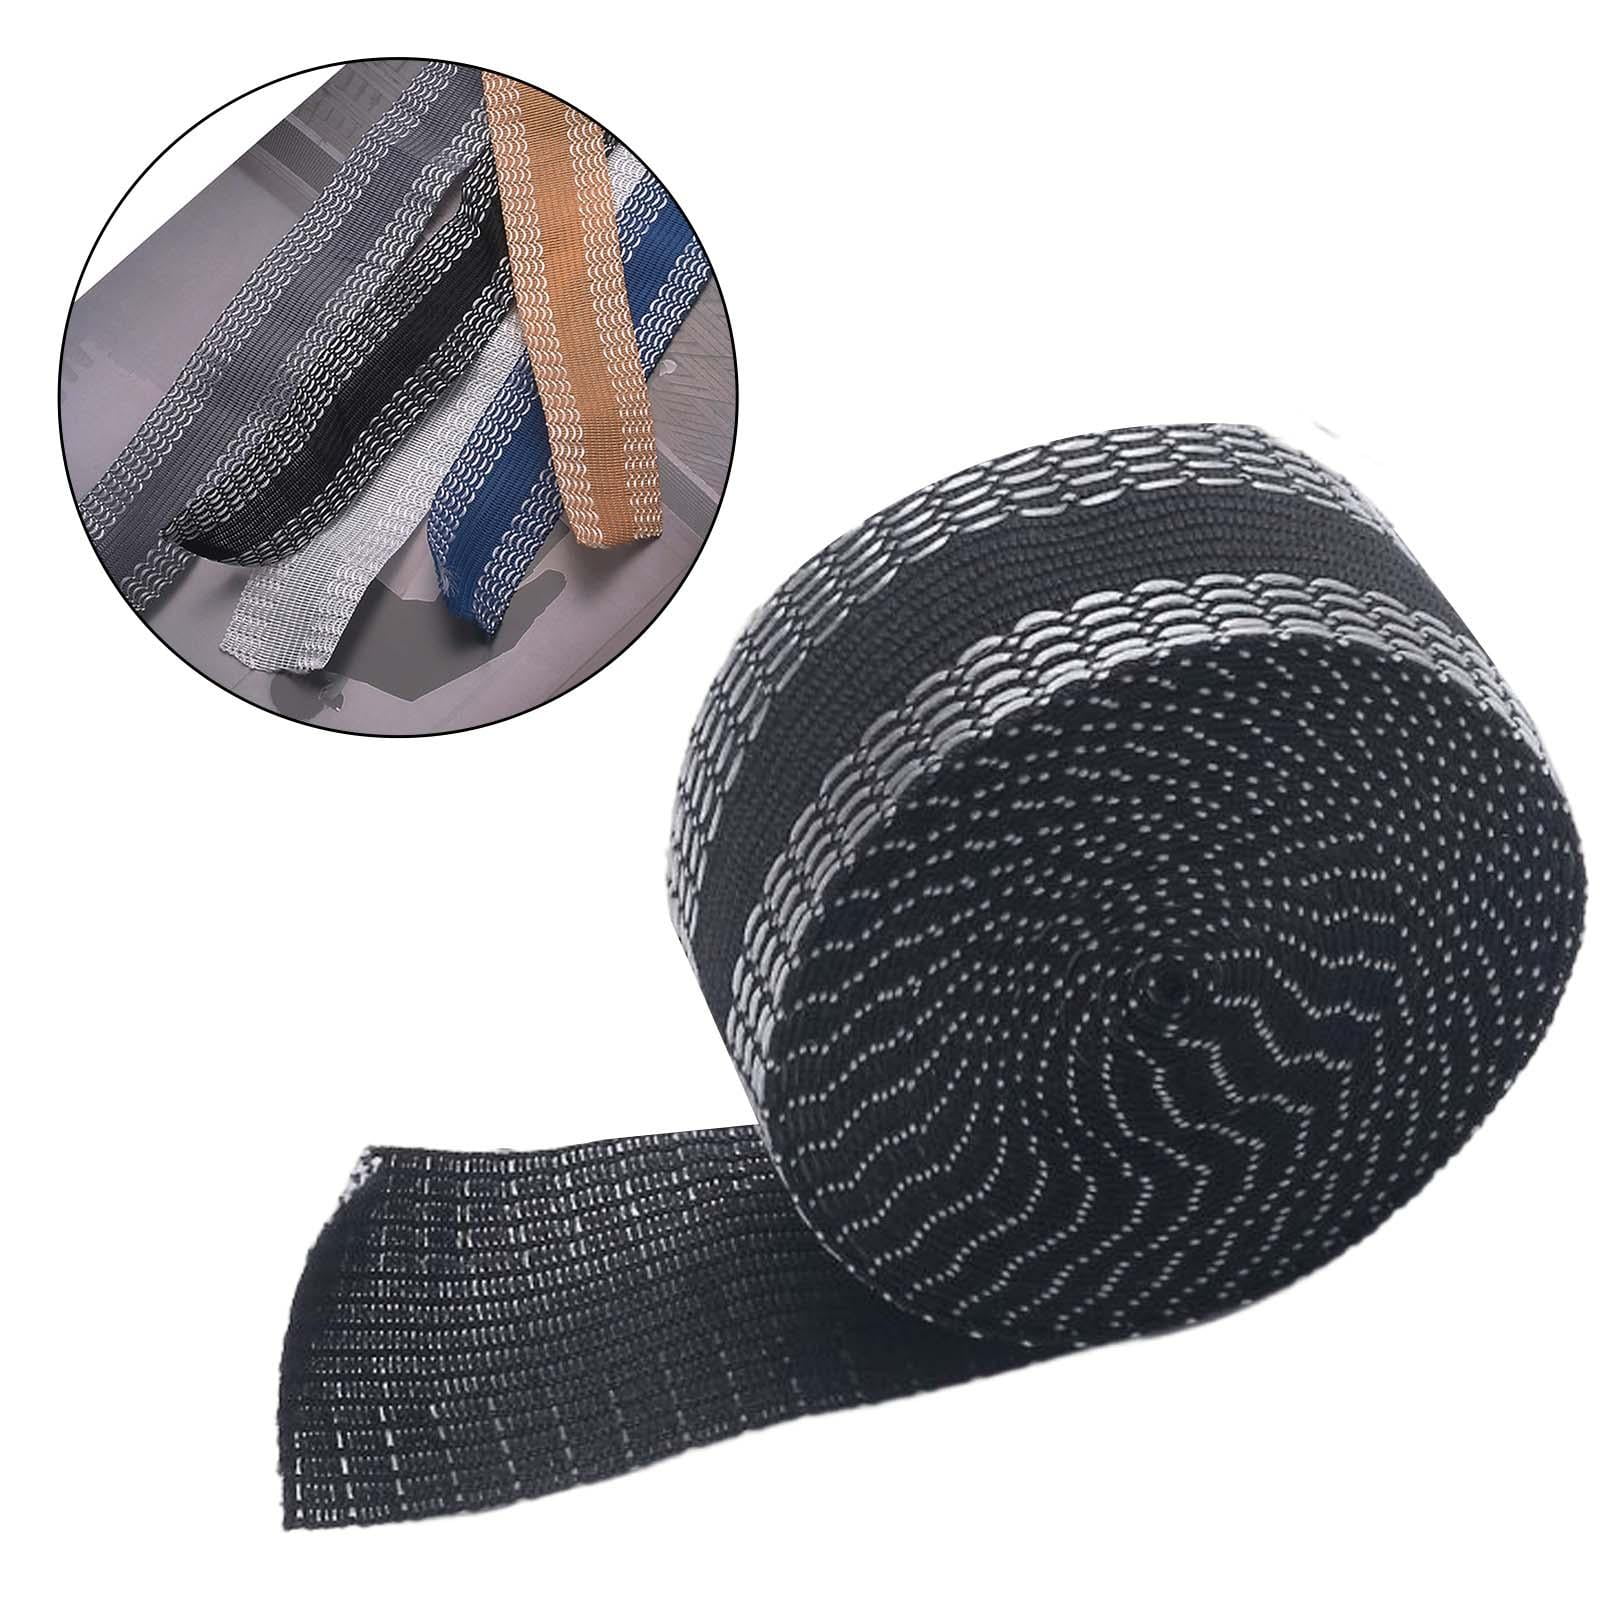 Polyester Hem Tape Pants Shortening Tape Pants Fabric Tape 1 Inch X 5.5  Yards Iron on Hemming Tape for Clothes Jeans Dress Trousers Sewing , Black  5m Black 